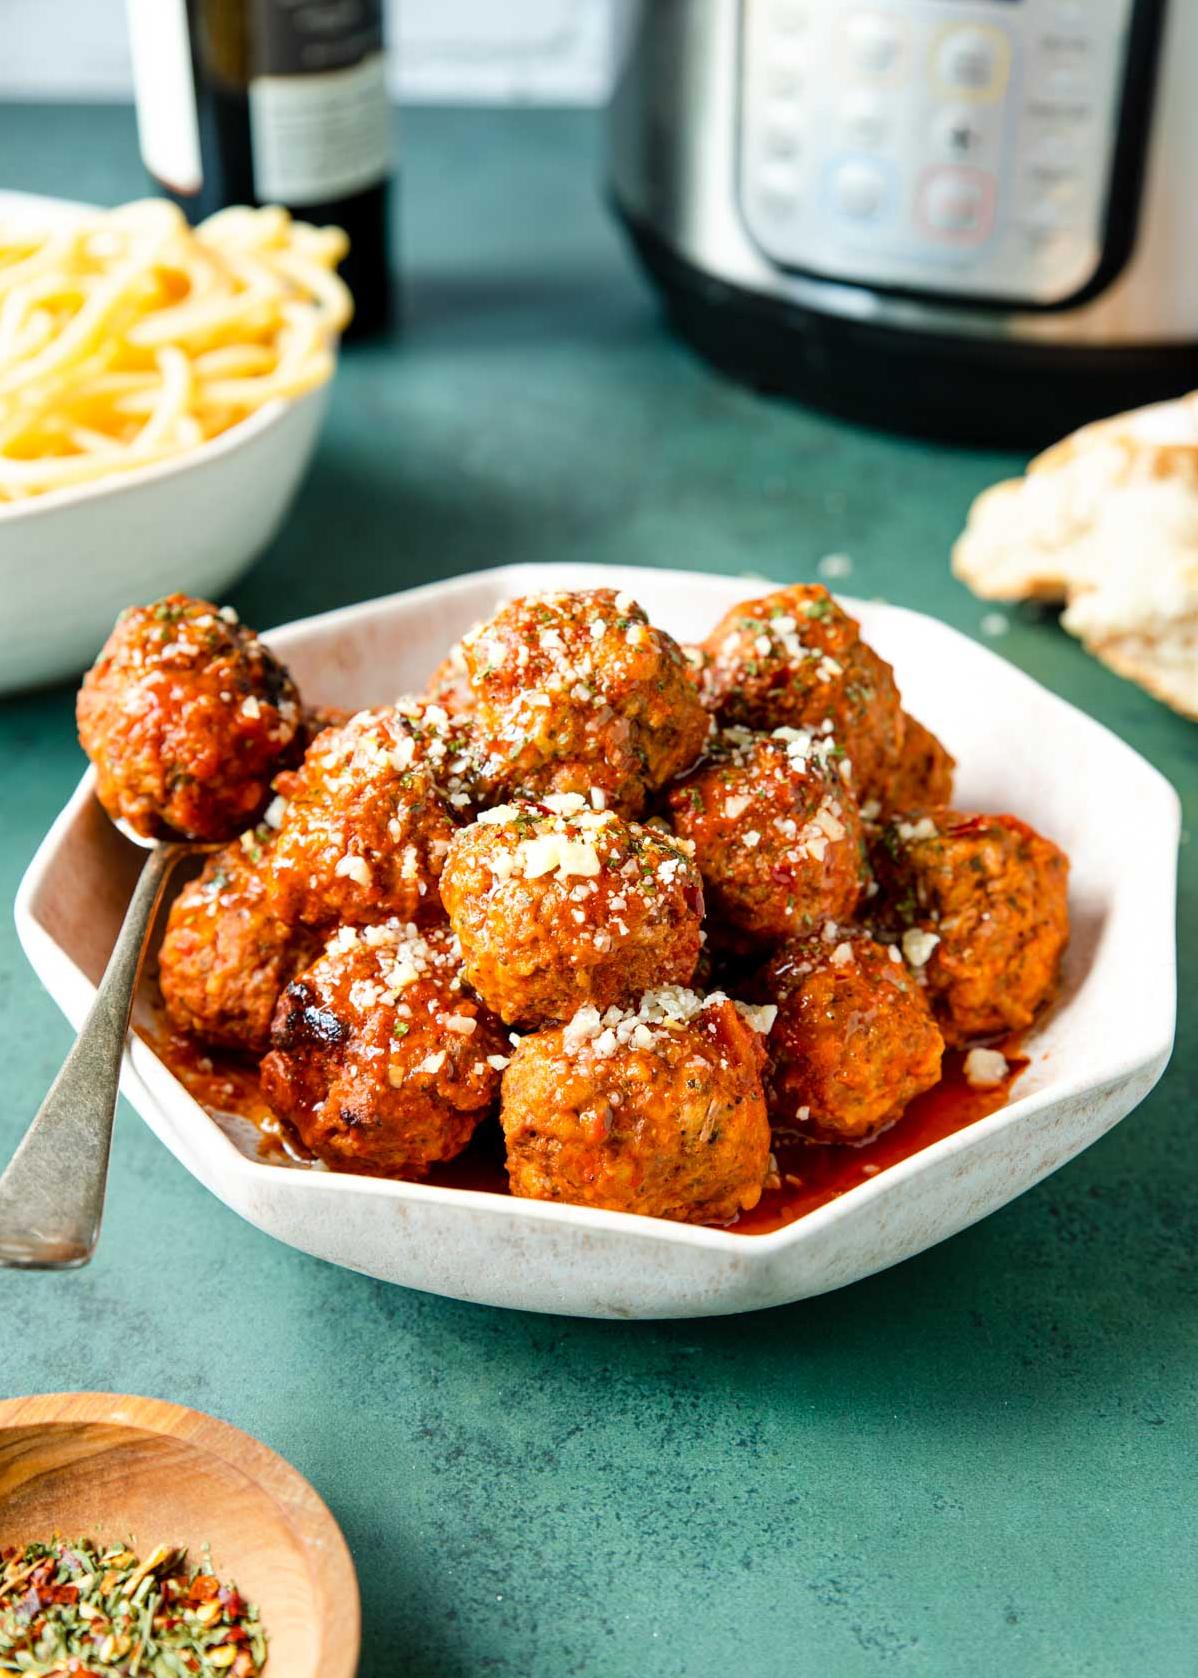  These Instant Pot meatballs are like little bites of Italy in every bite.